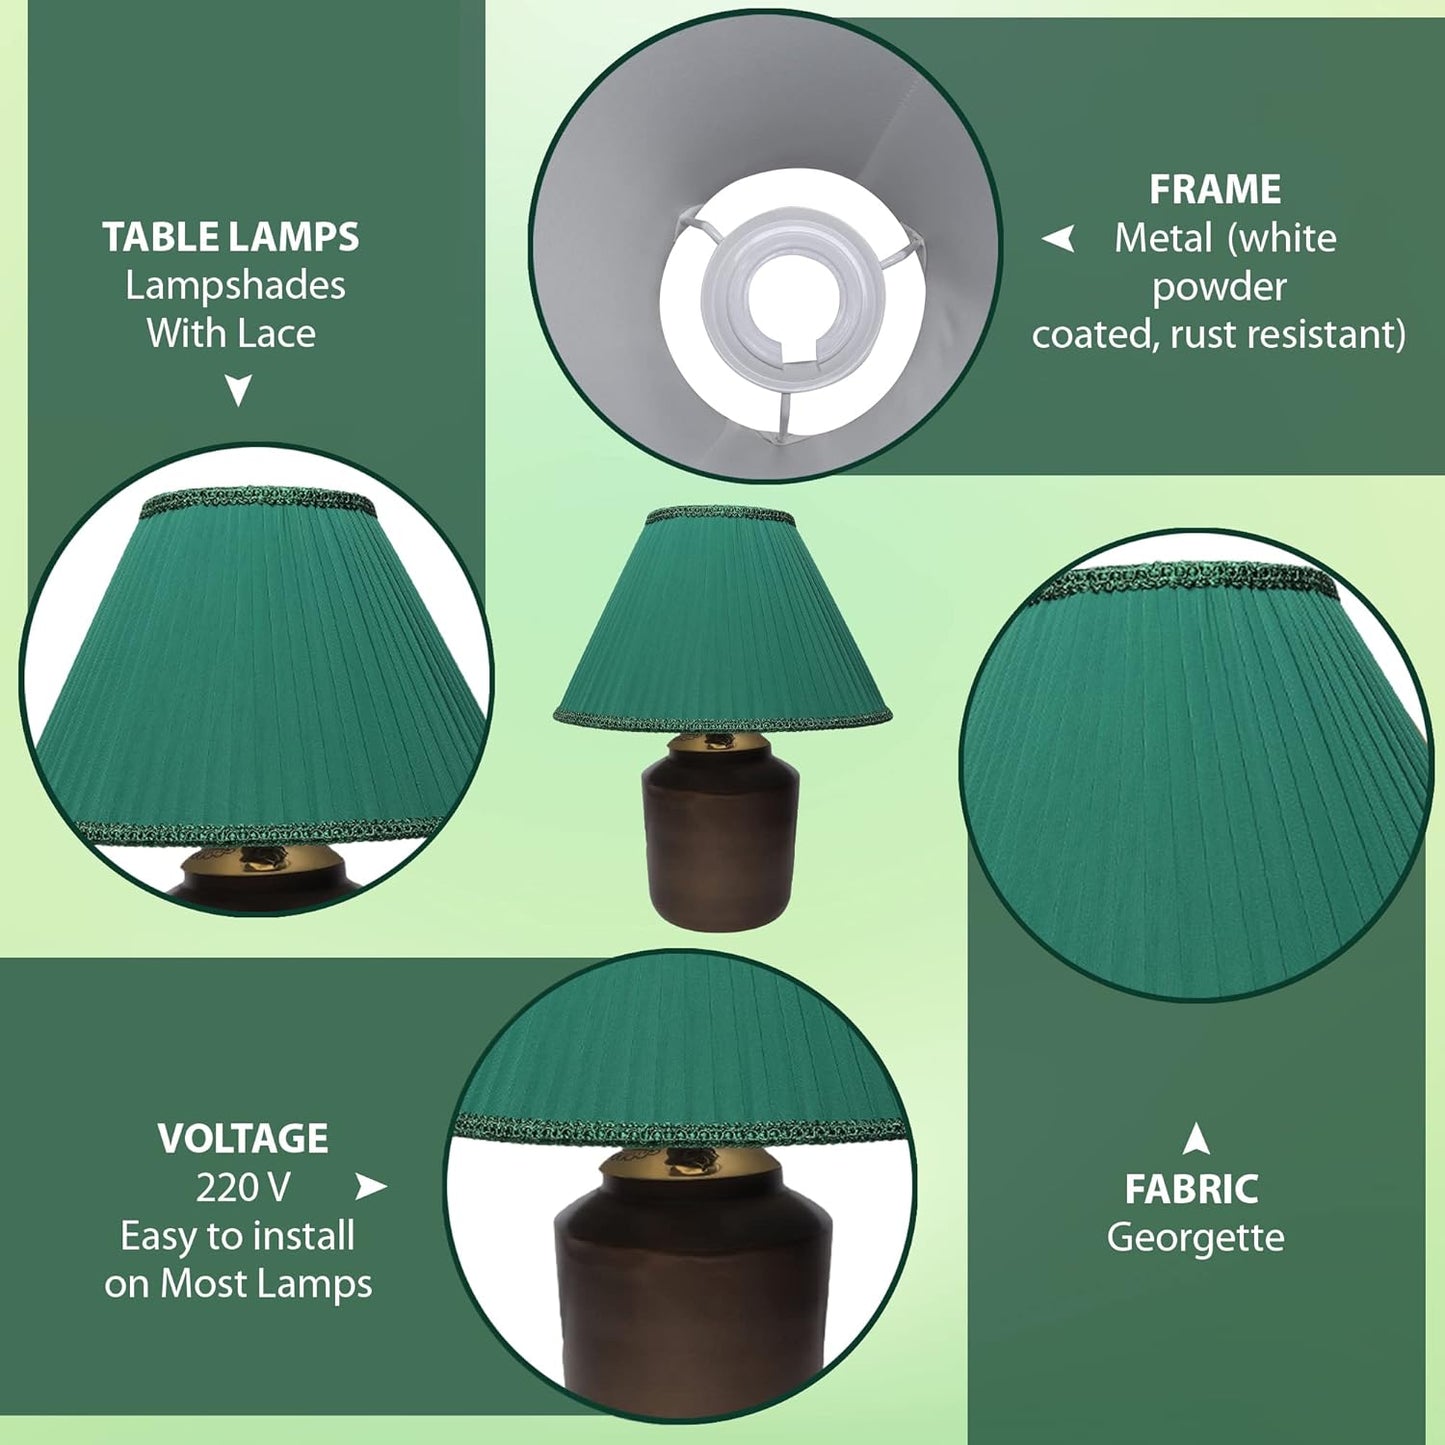 Georgette Pleated Lampshade with Lace Trim in Emerald Green